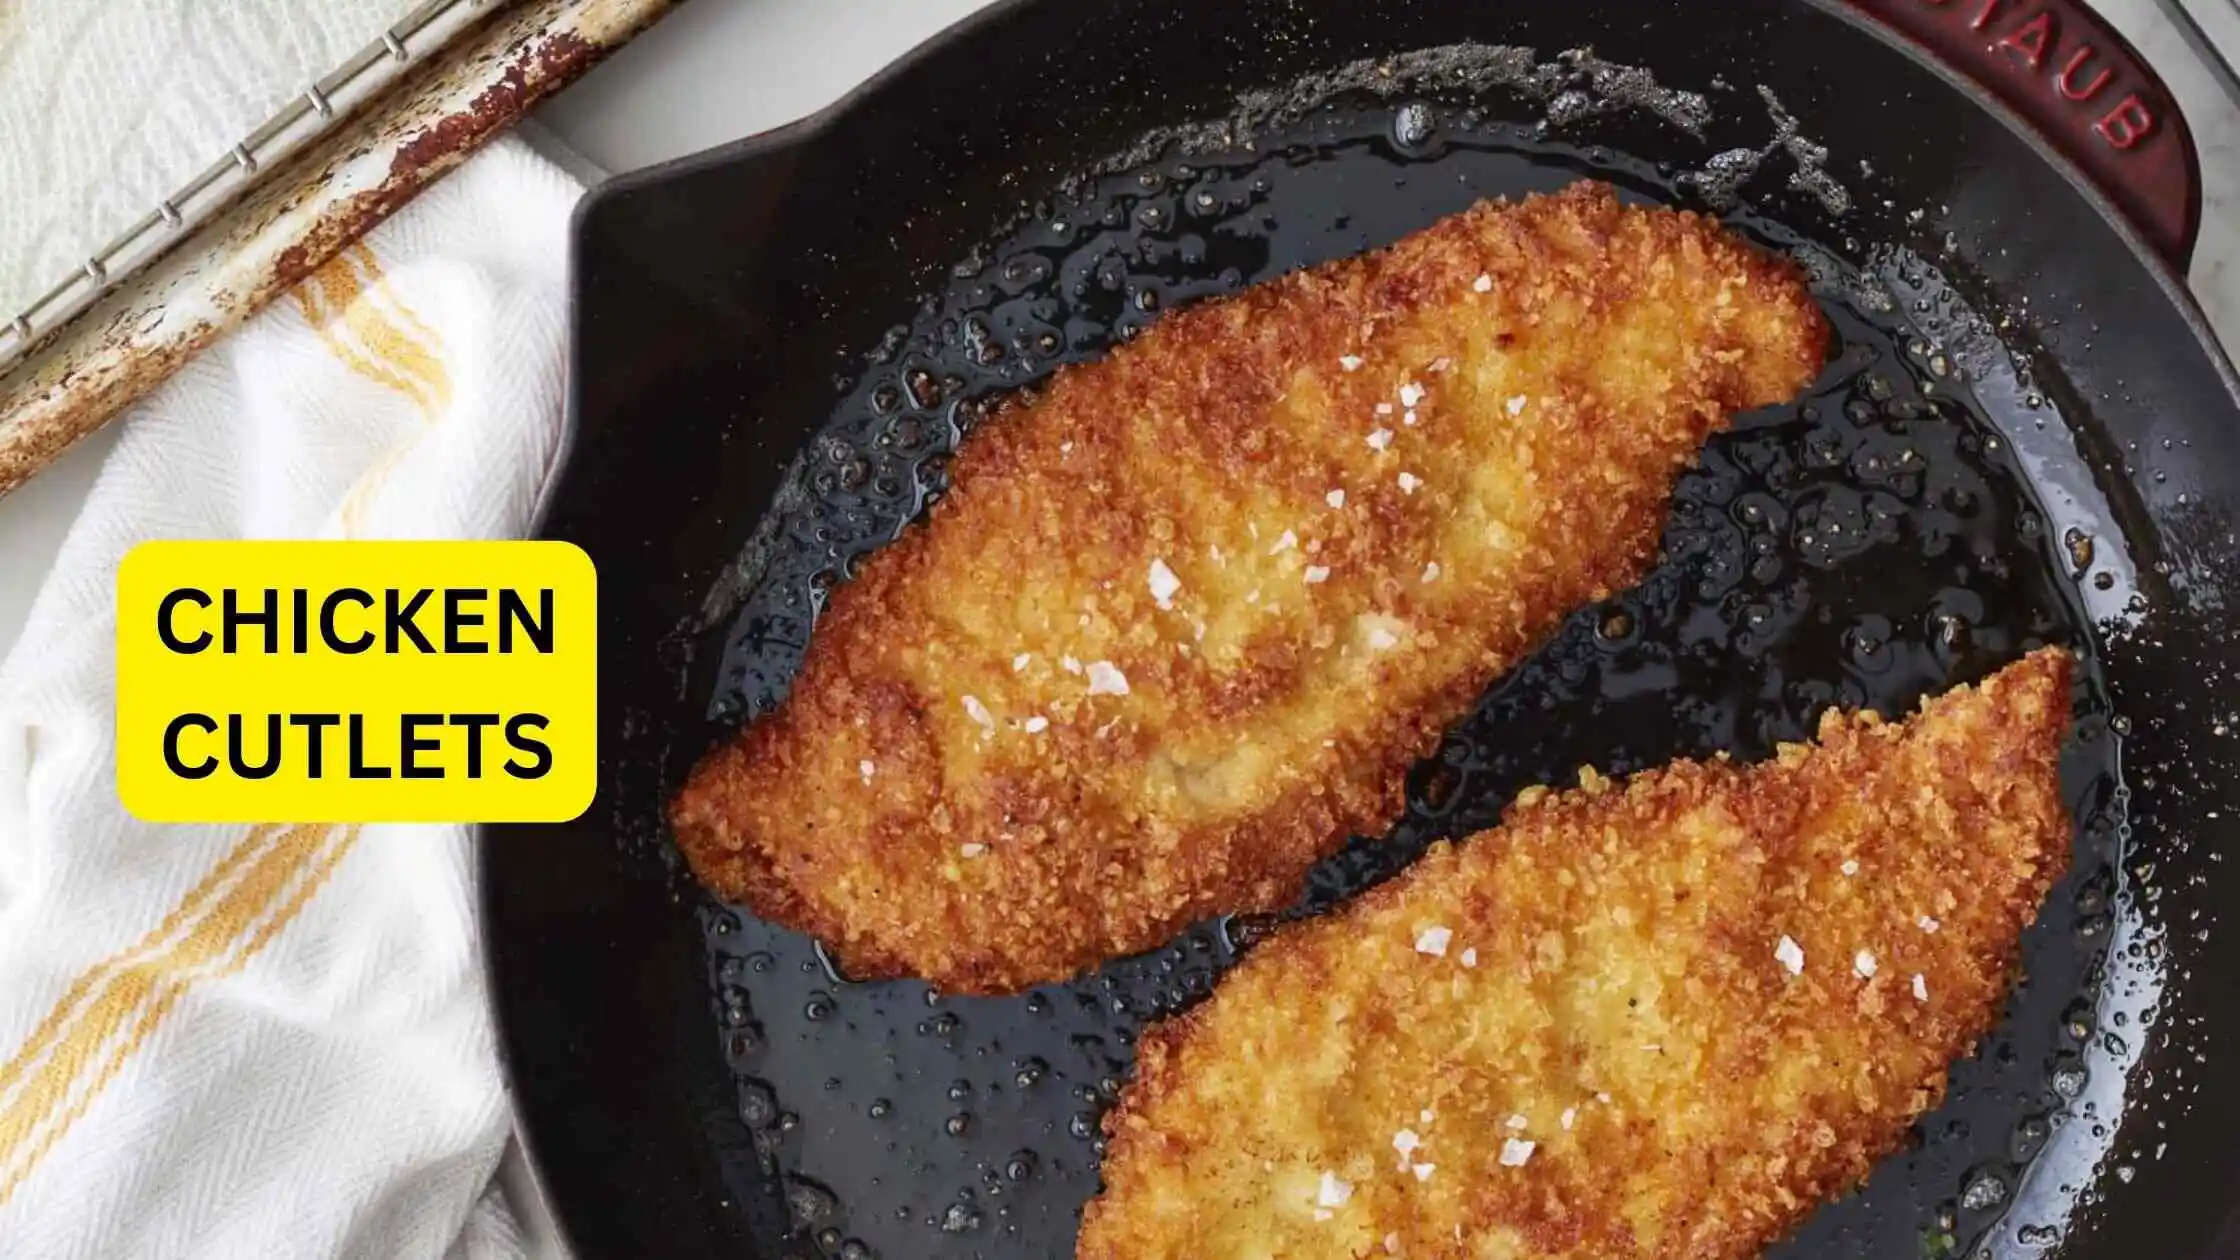 How to Make Chicken Cutlets